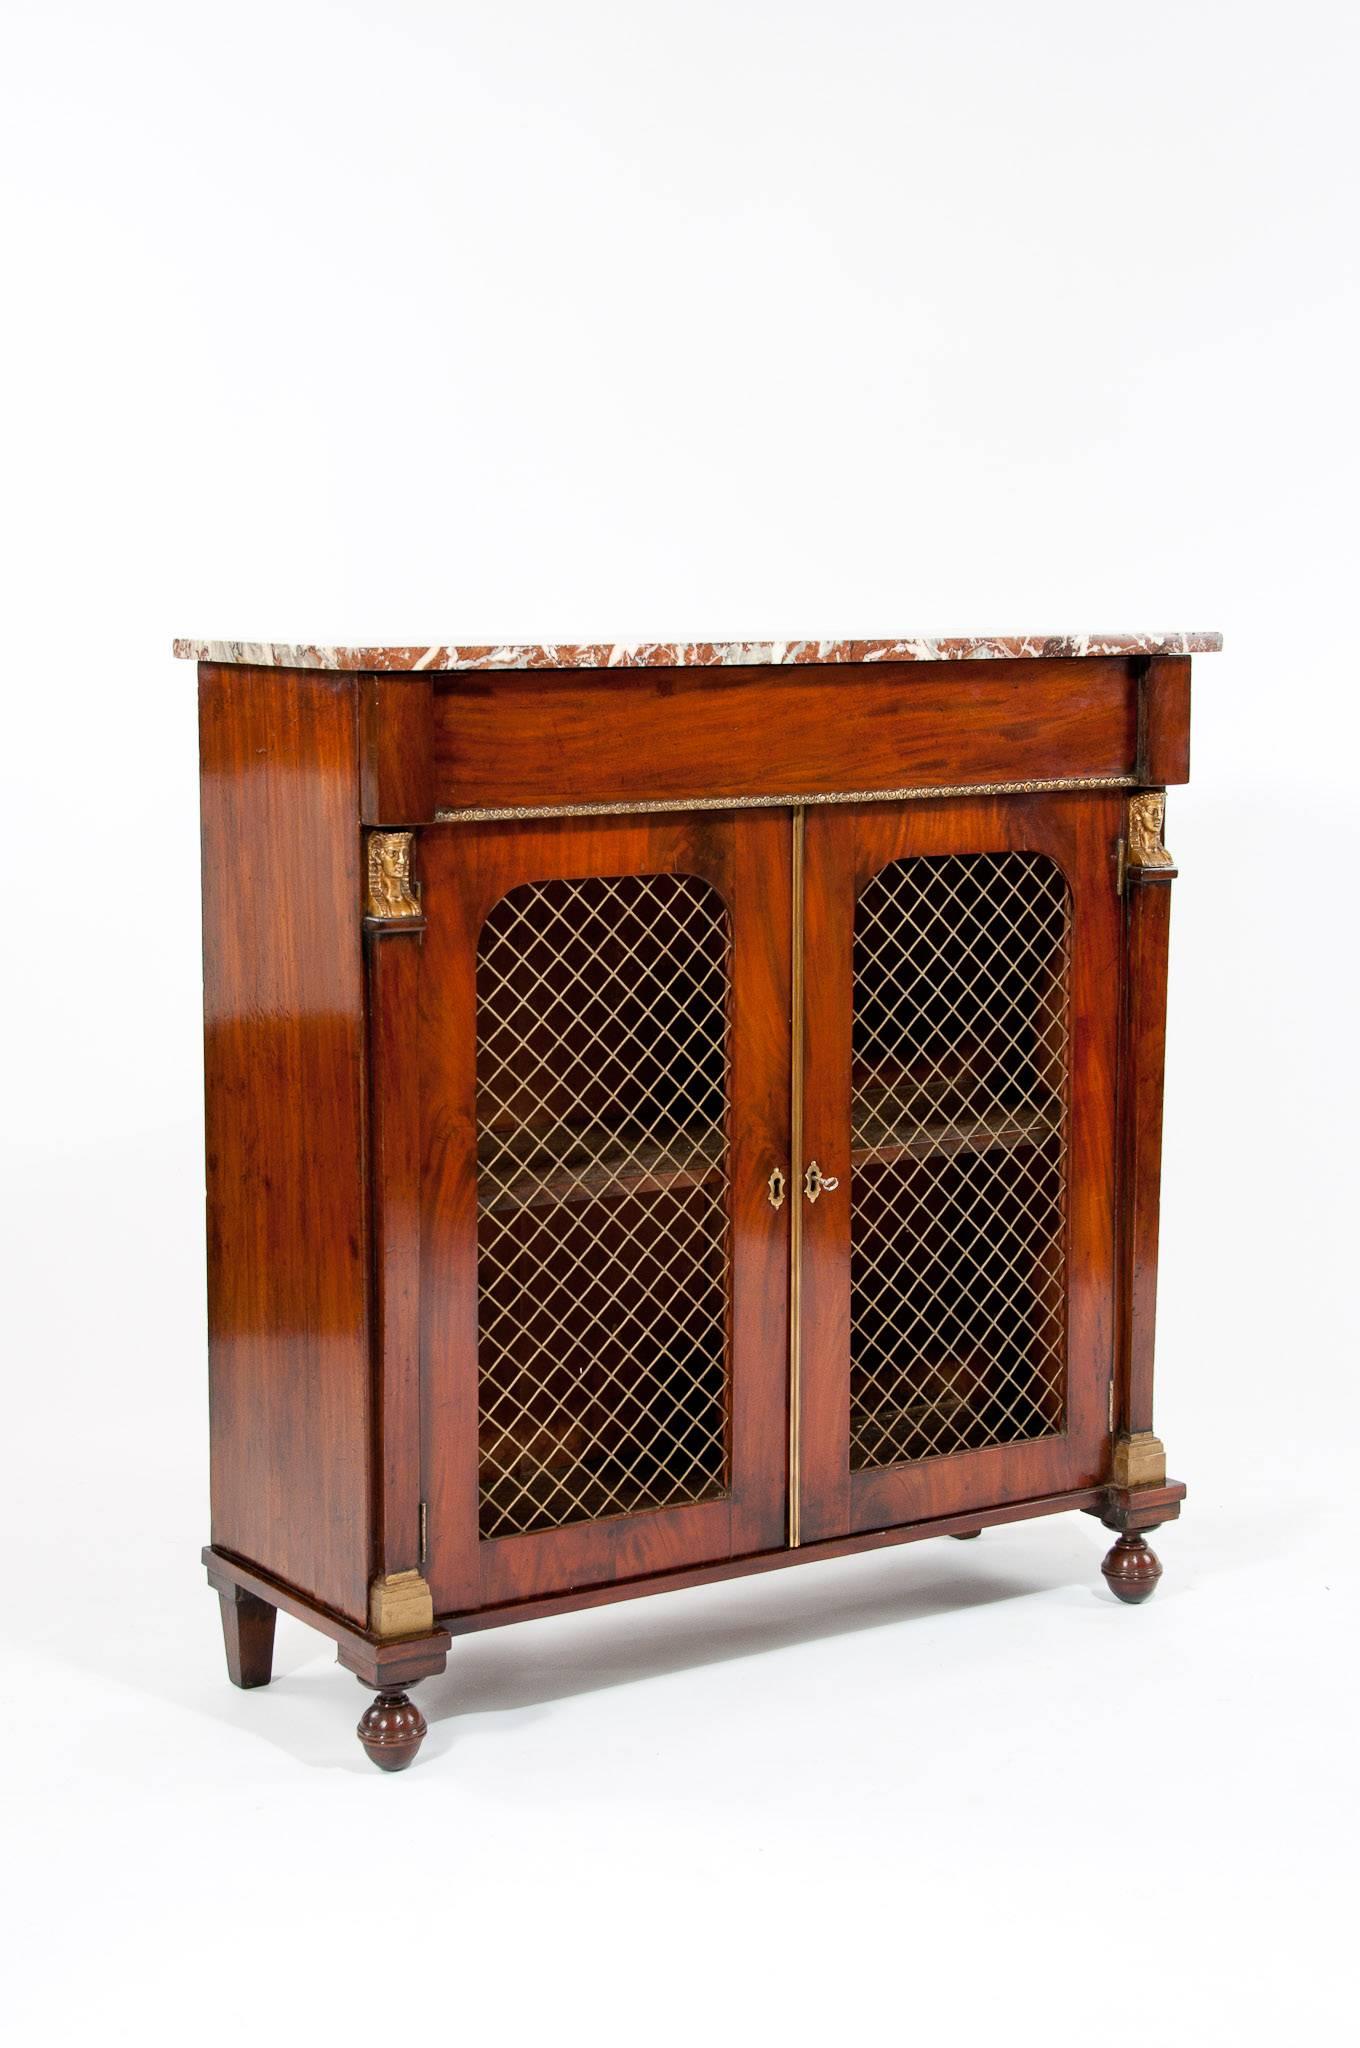 A quality Regency marble topped mahogany two door chiffonier / side cabinet of very good proportions being three feet wide. This antique chiffonier / side cabinet dating from the Regency period has a rectangular marble top sitting over a frieze